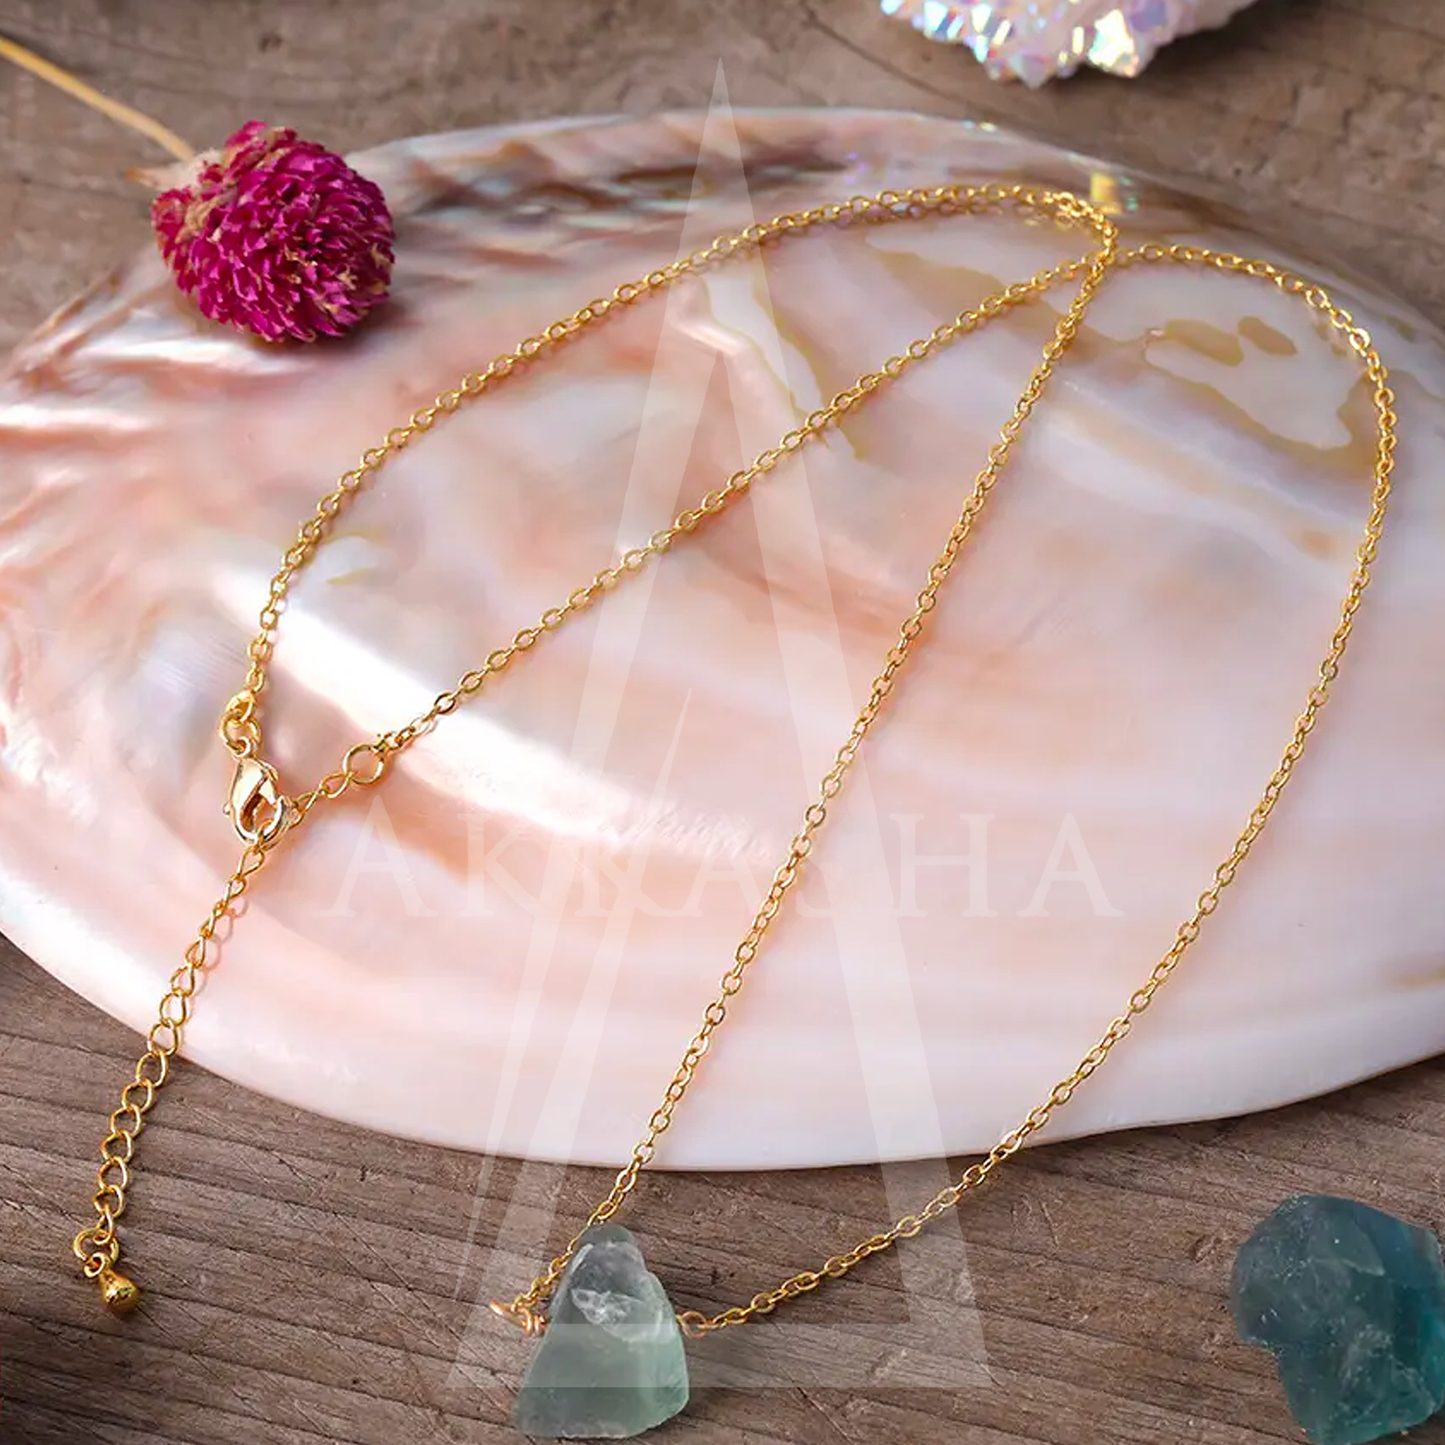 RAW CRYSTAL NECKLACE